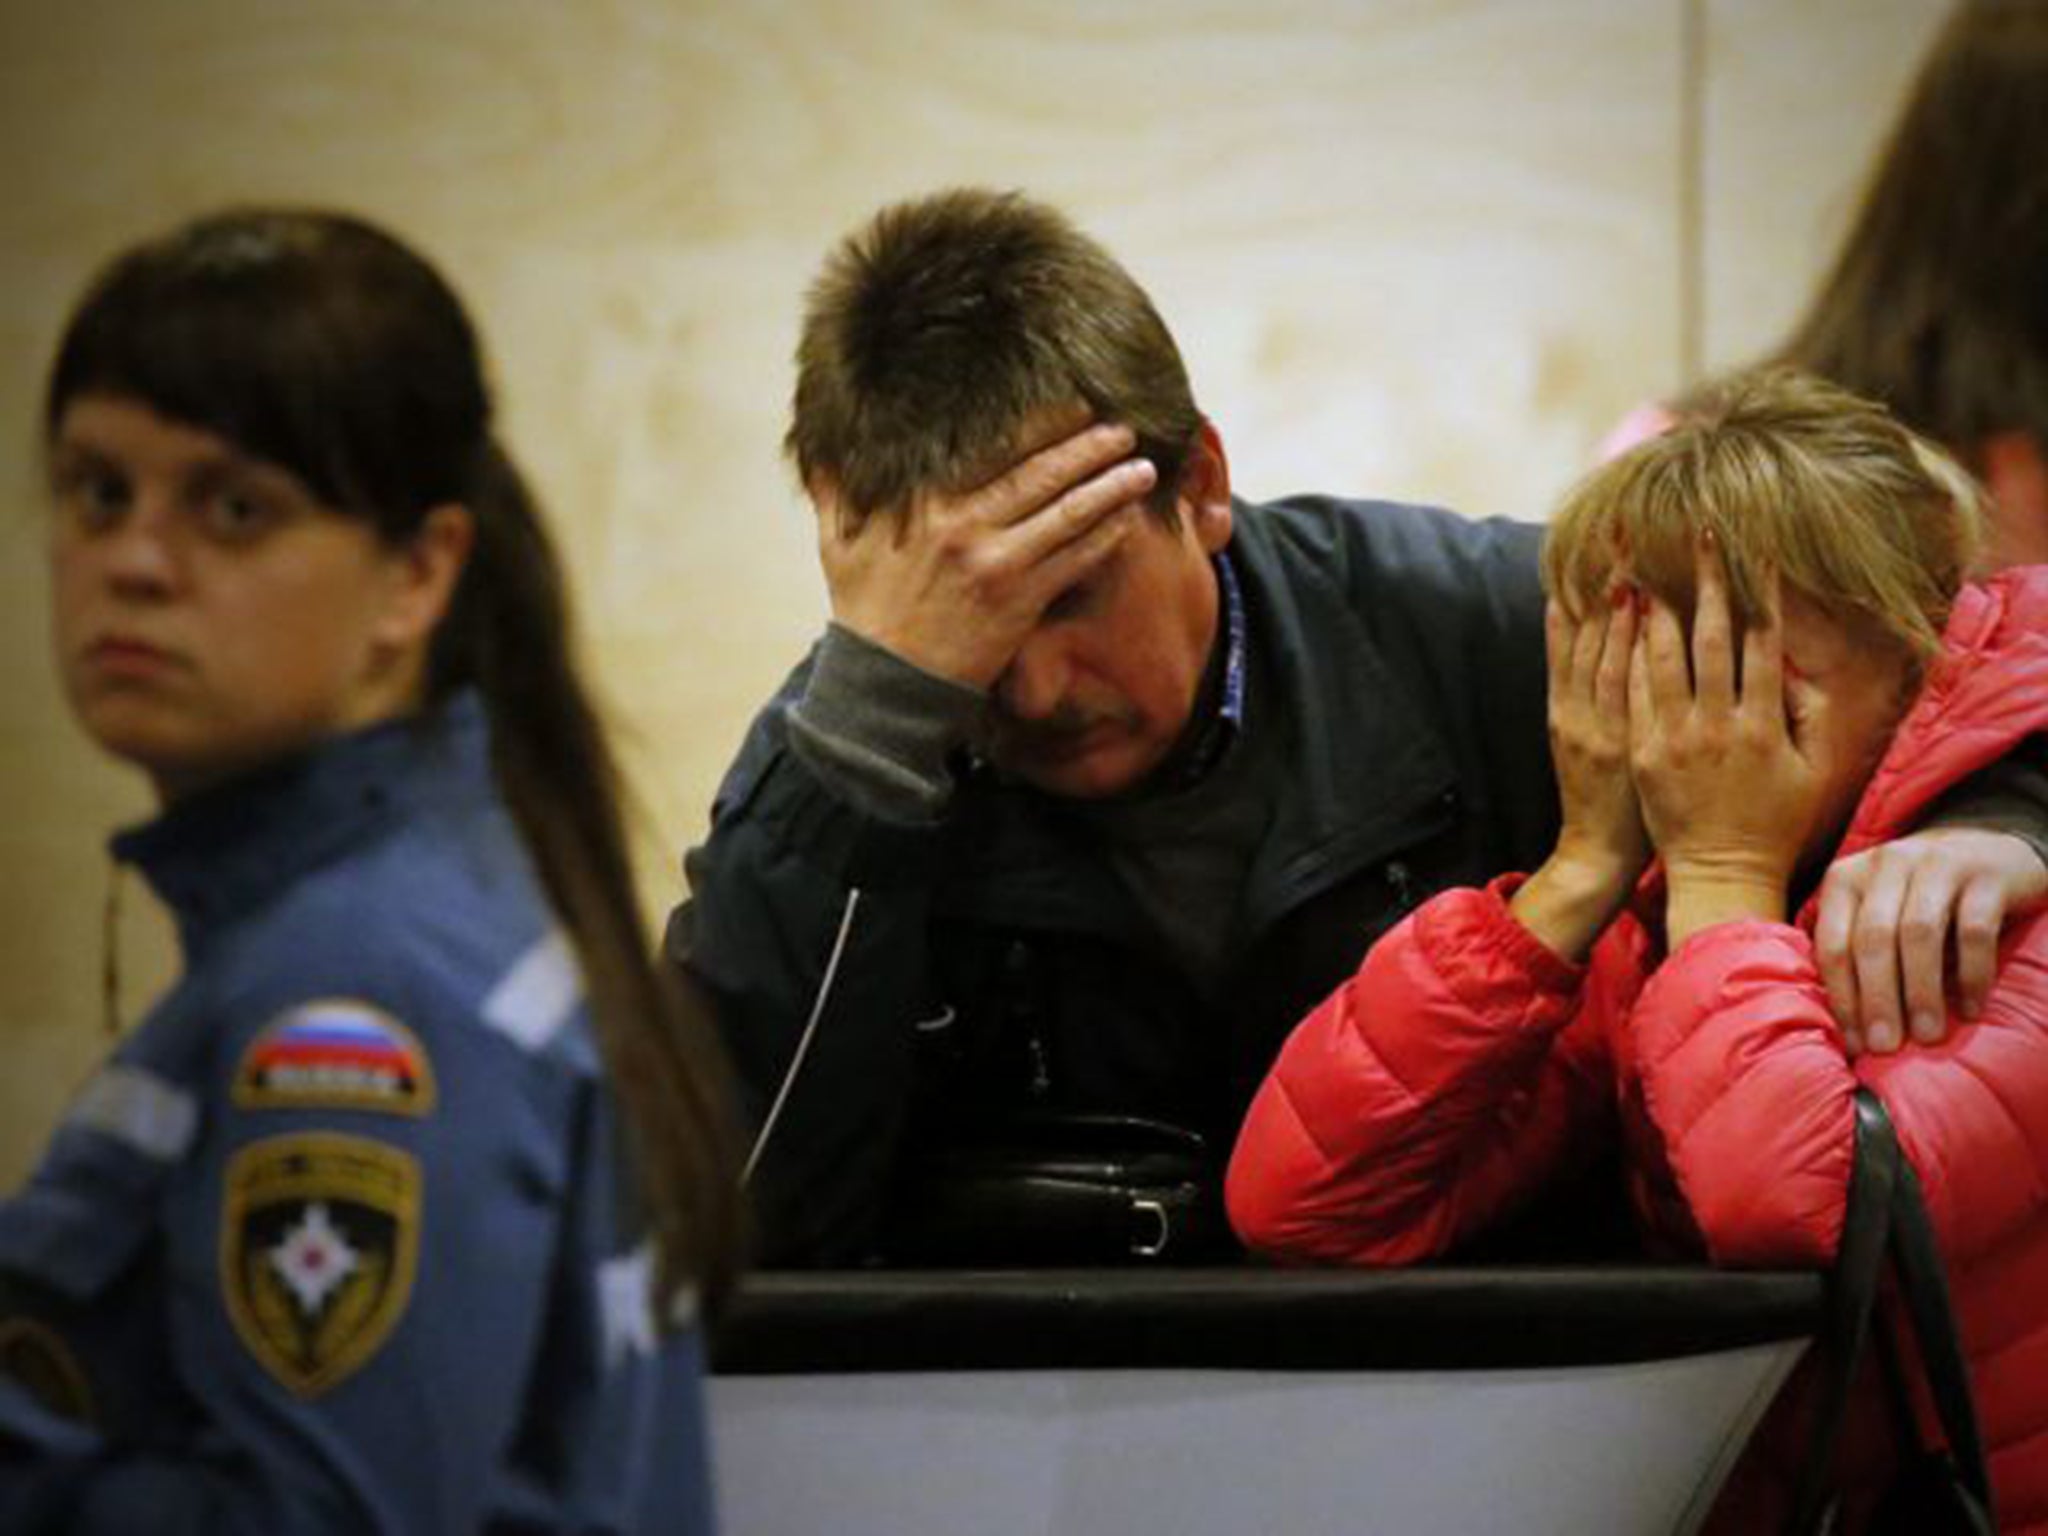 Relatives of passengers of Metrojet flight 9268 are told the news at a hotel in St. Petersburg, Russia. All passengers and crew members on board the Airbus A321 died in the crash